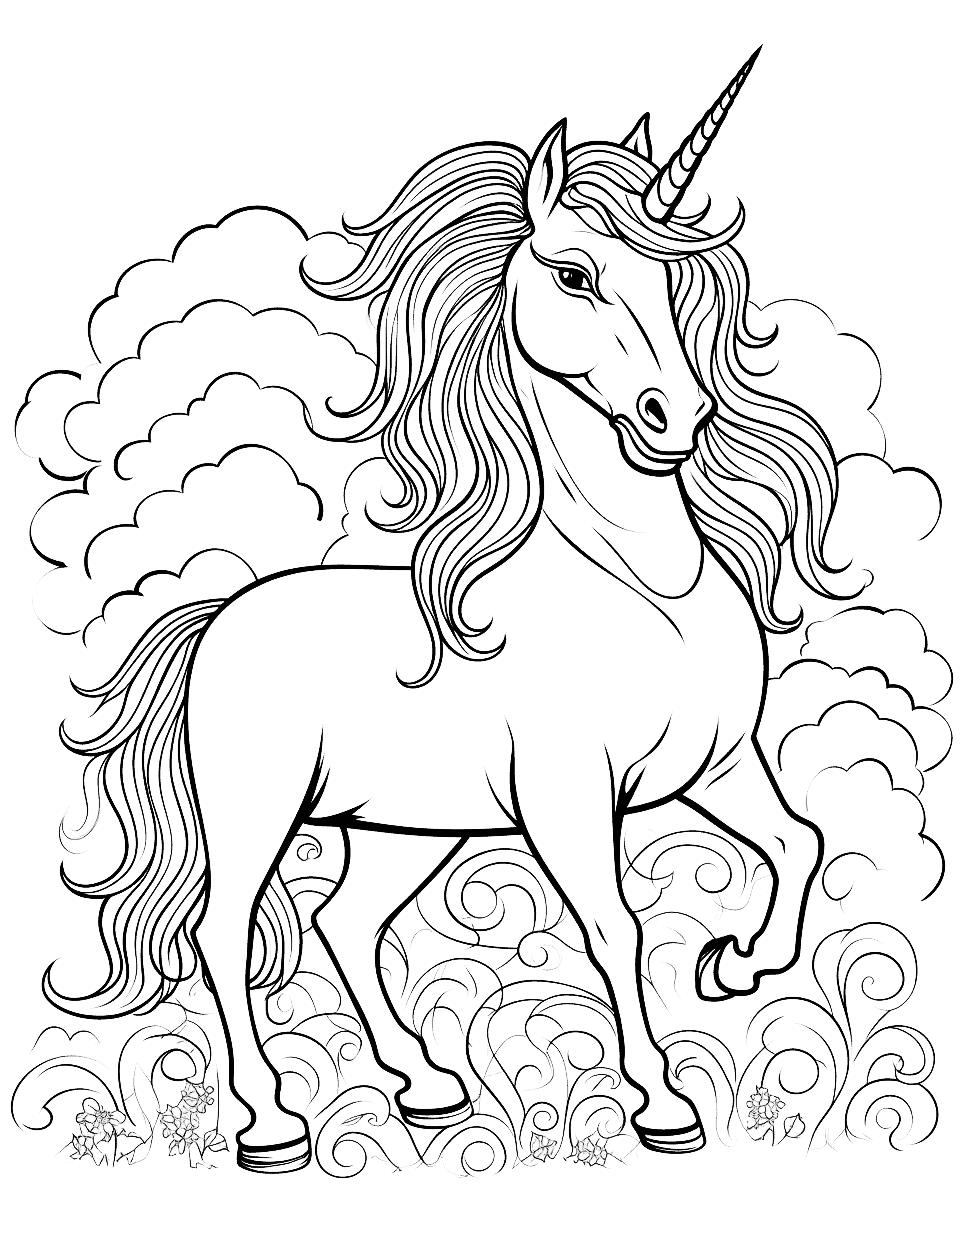 Advanced Unicorn Art Coloring Page - An advanced-level unicorn coloring page featuring a detailed unicorn standing against a majestic, intricate backdrop.